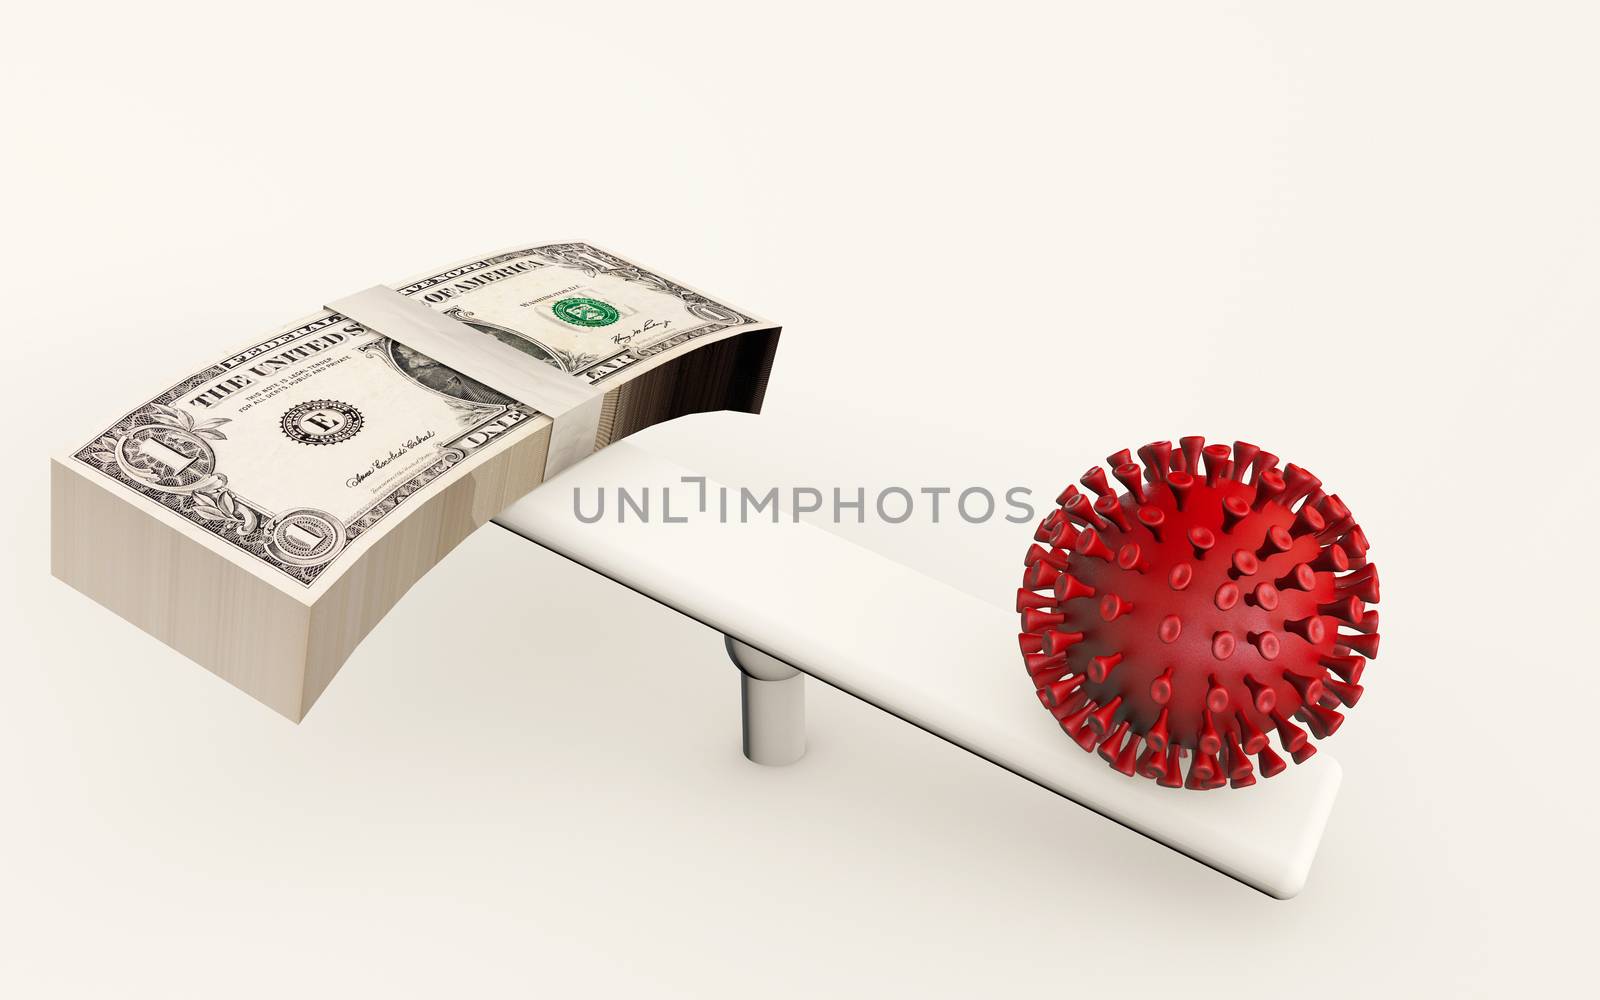 3d rendering of coronavirus disease impact on financial markets. Business concept of crash of economy causing fear. Virus and american dollars money balance on a seesaw isolated on white background